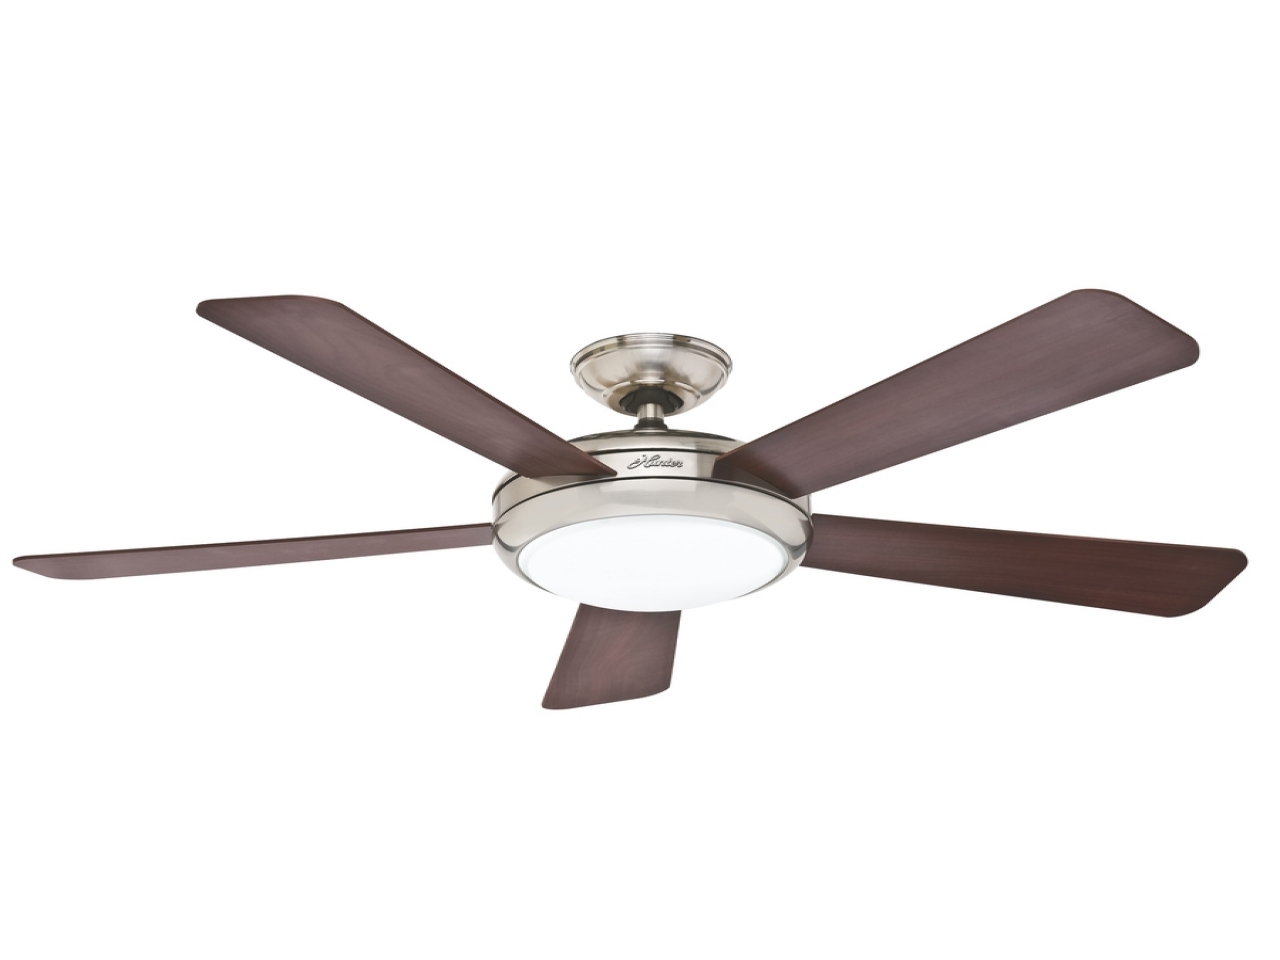 Permalink to Flush Mount Ceiling Fan With Light And Remote